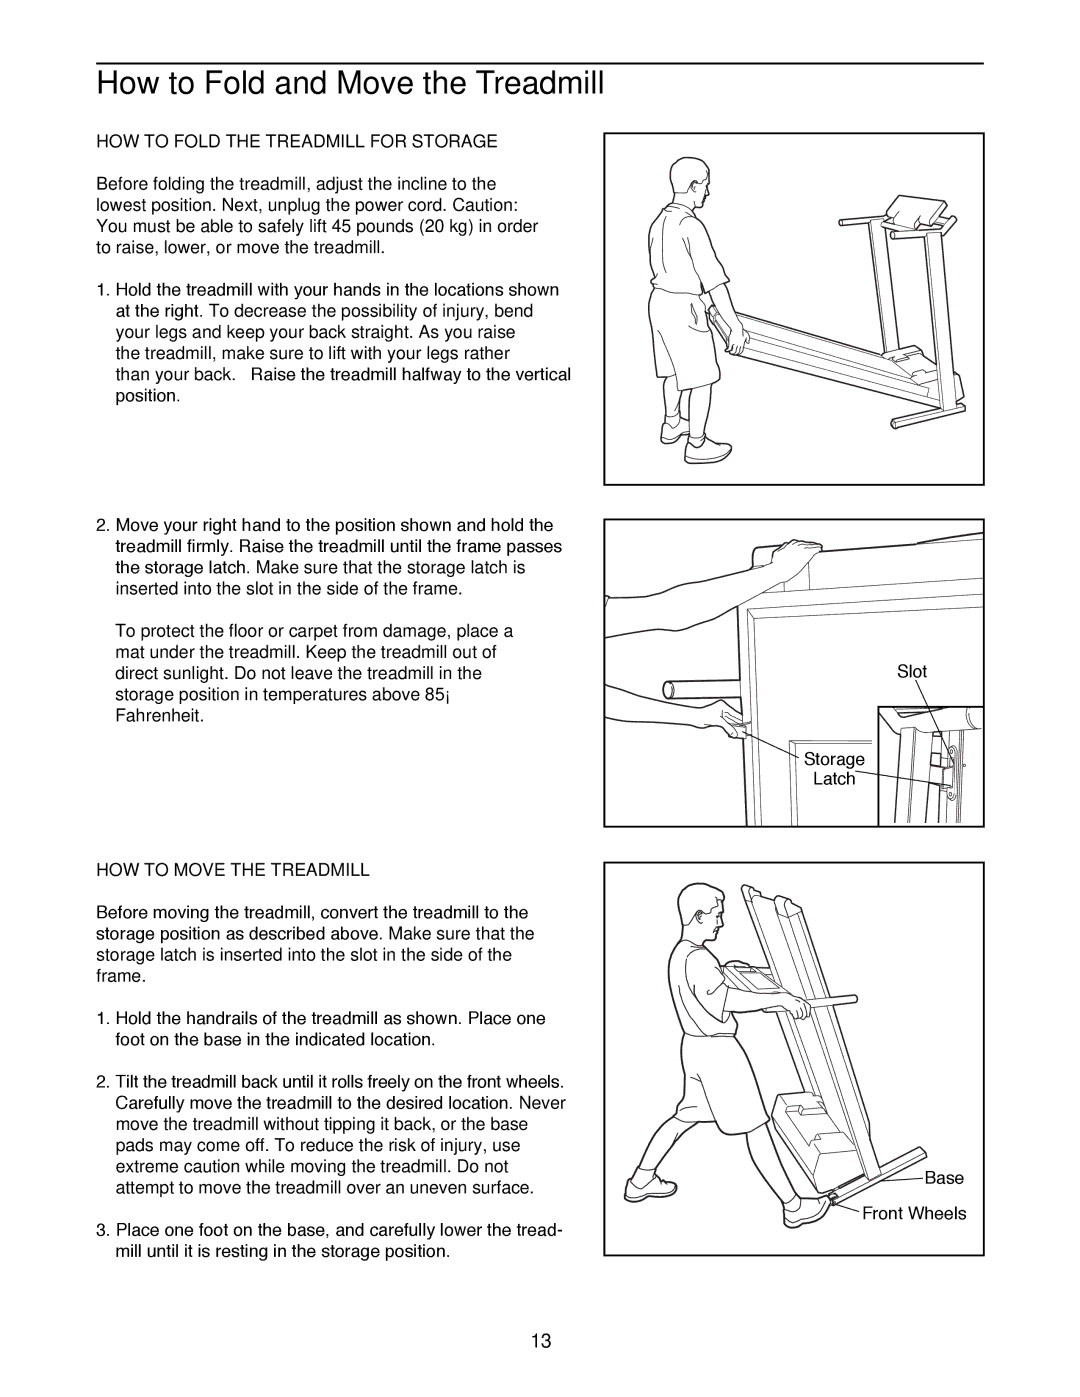 NordicTrack 1500 How to Fold and Move the Treadmill, HOW to Fold the Treadmill for Storage, HOW to Move the Treadmill 